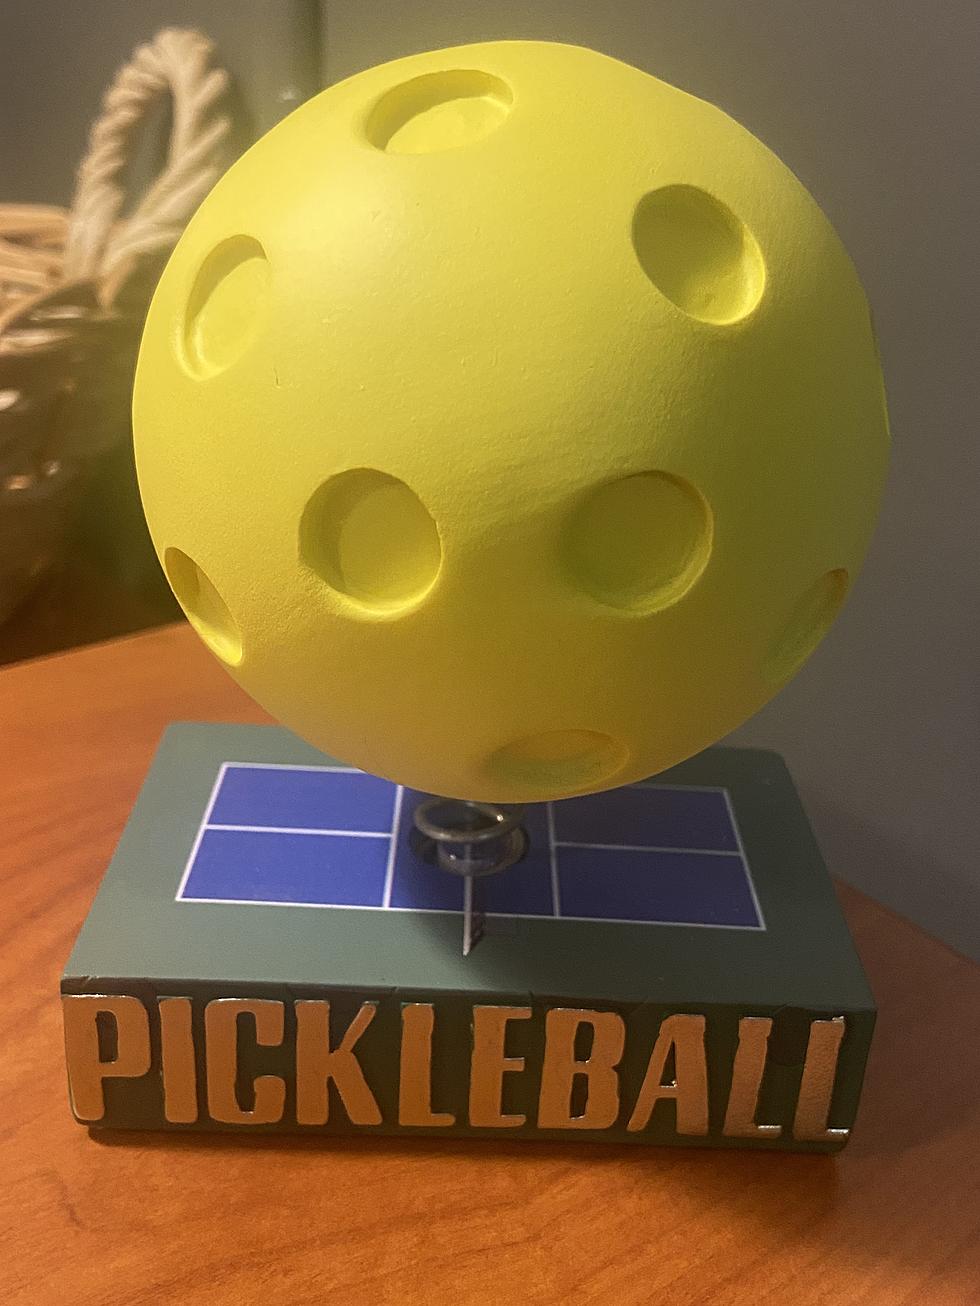 August 8th – National Pickleball Day